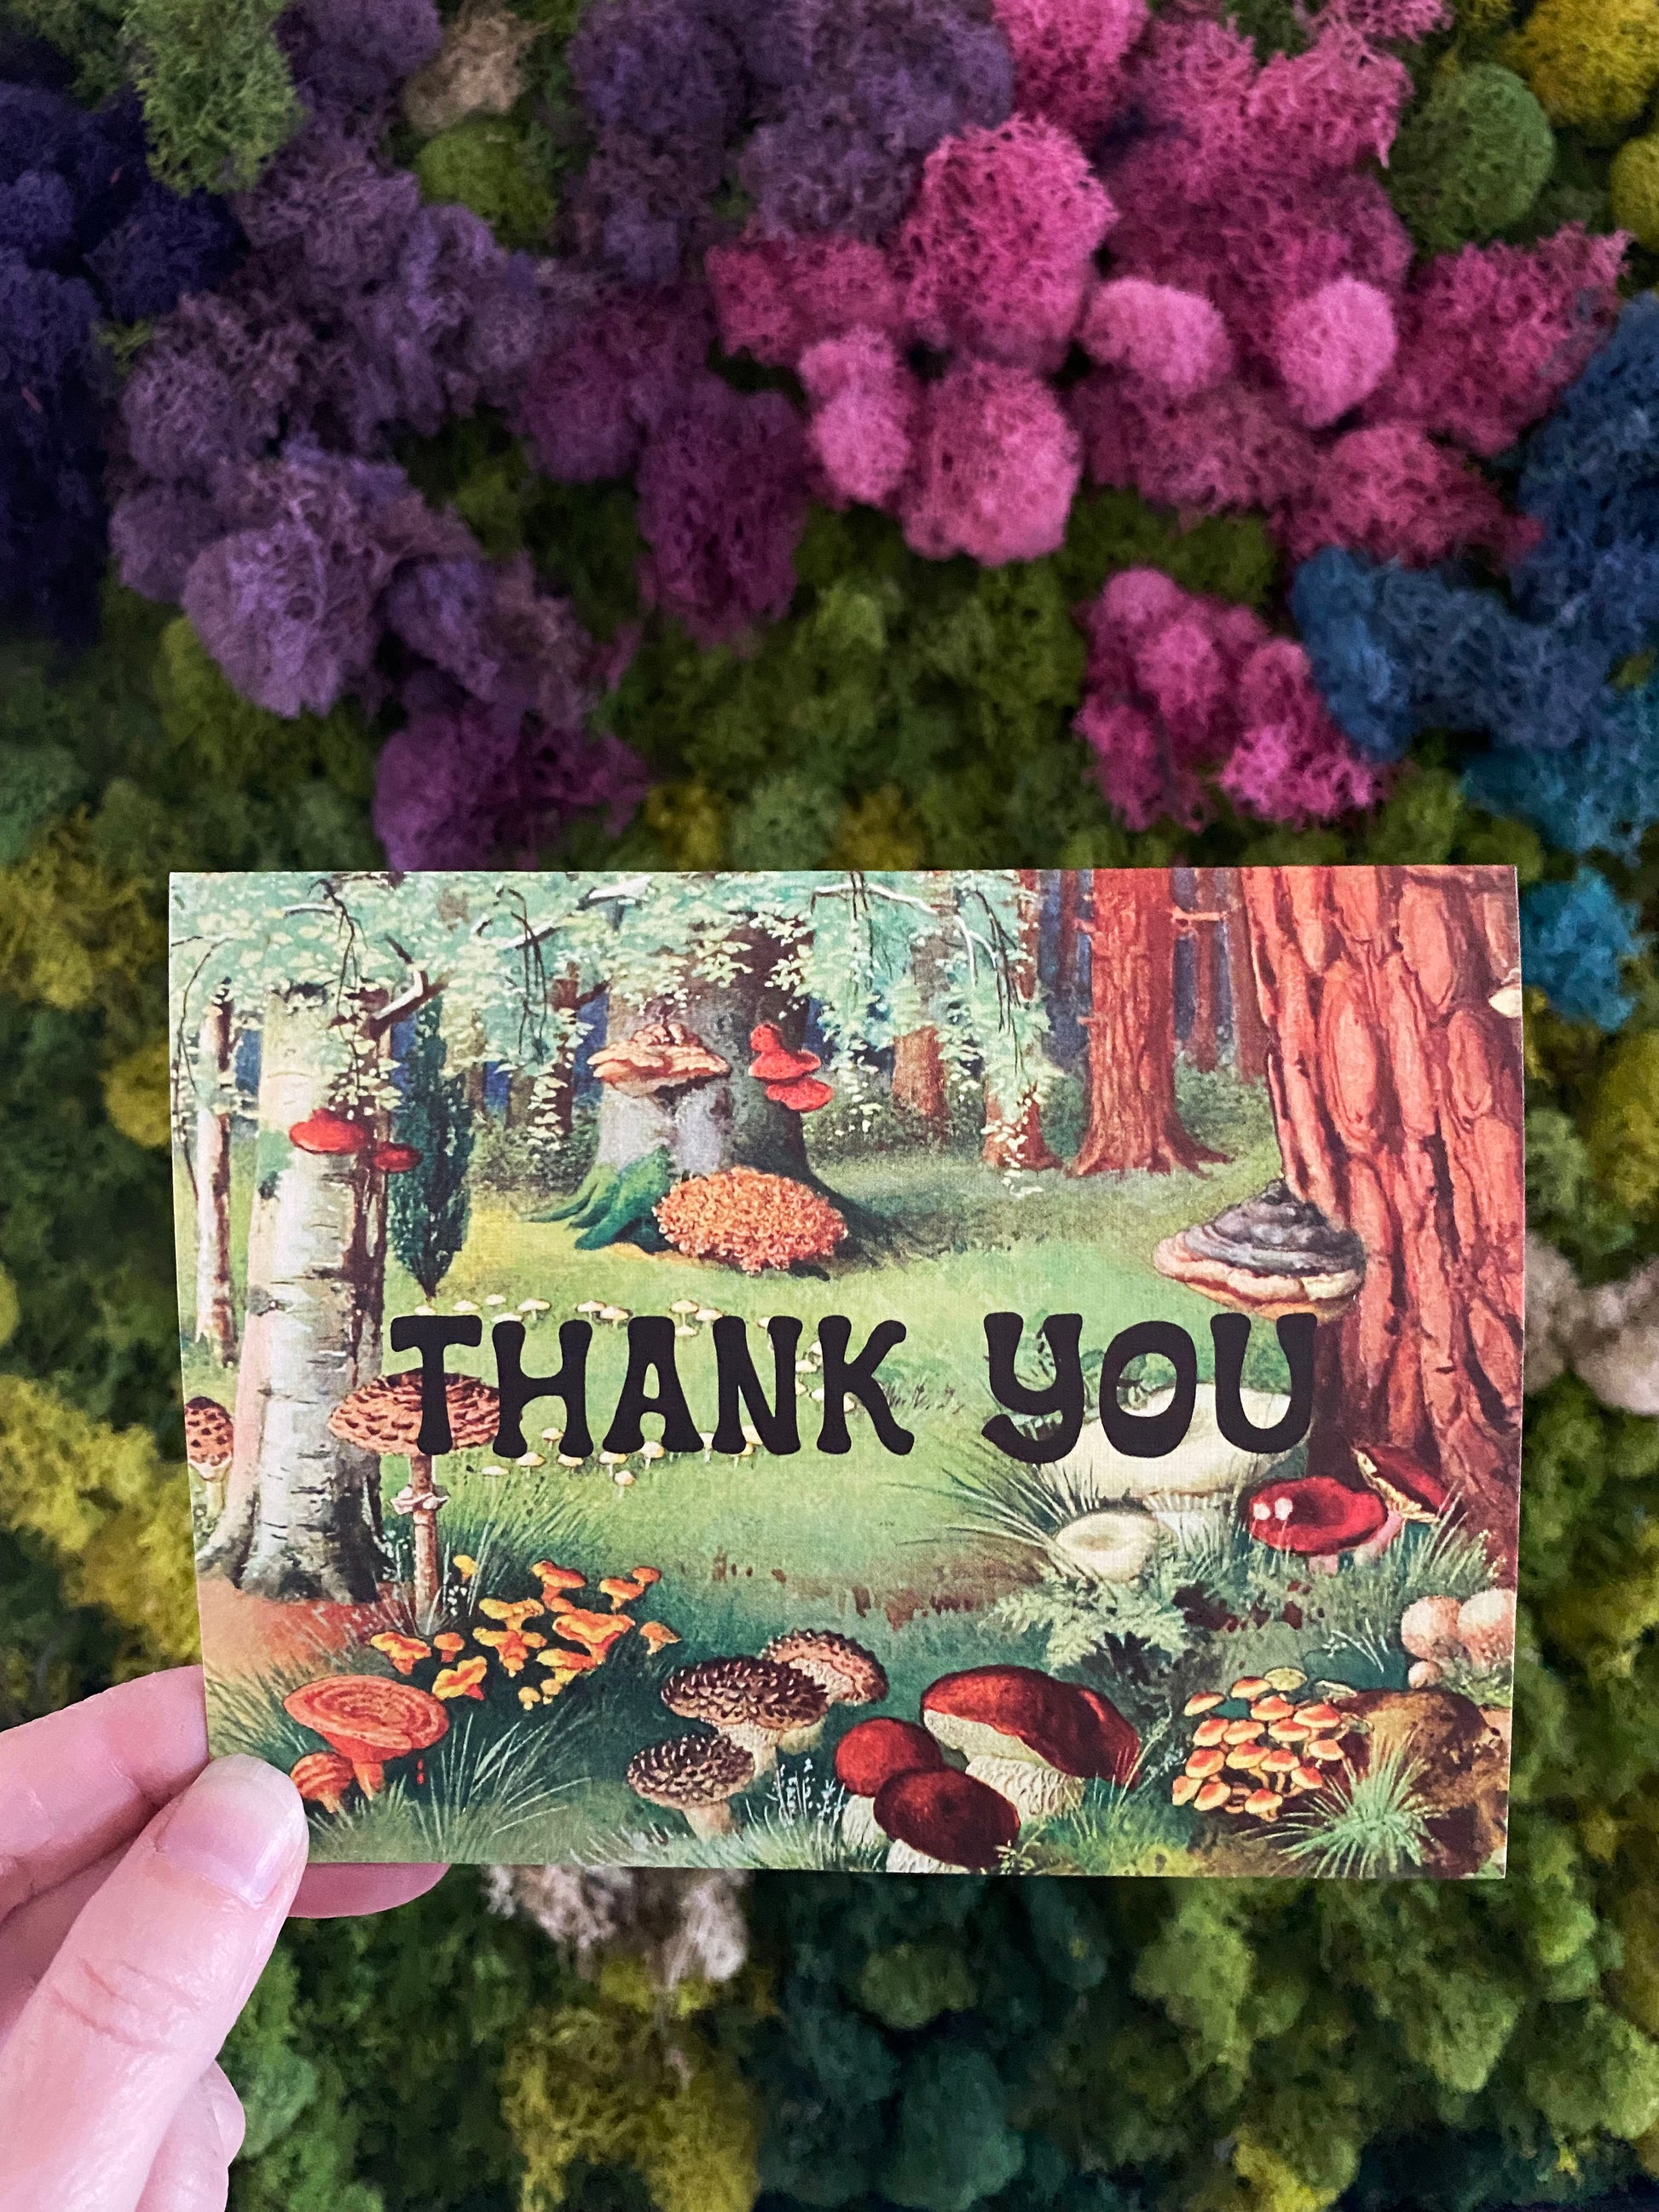 thank you note card notecard snail mail write a letter woods trees mushies mushrooms leaves flowers grass nature outdoor scene 